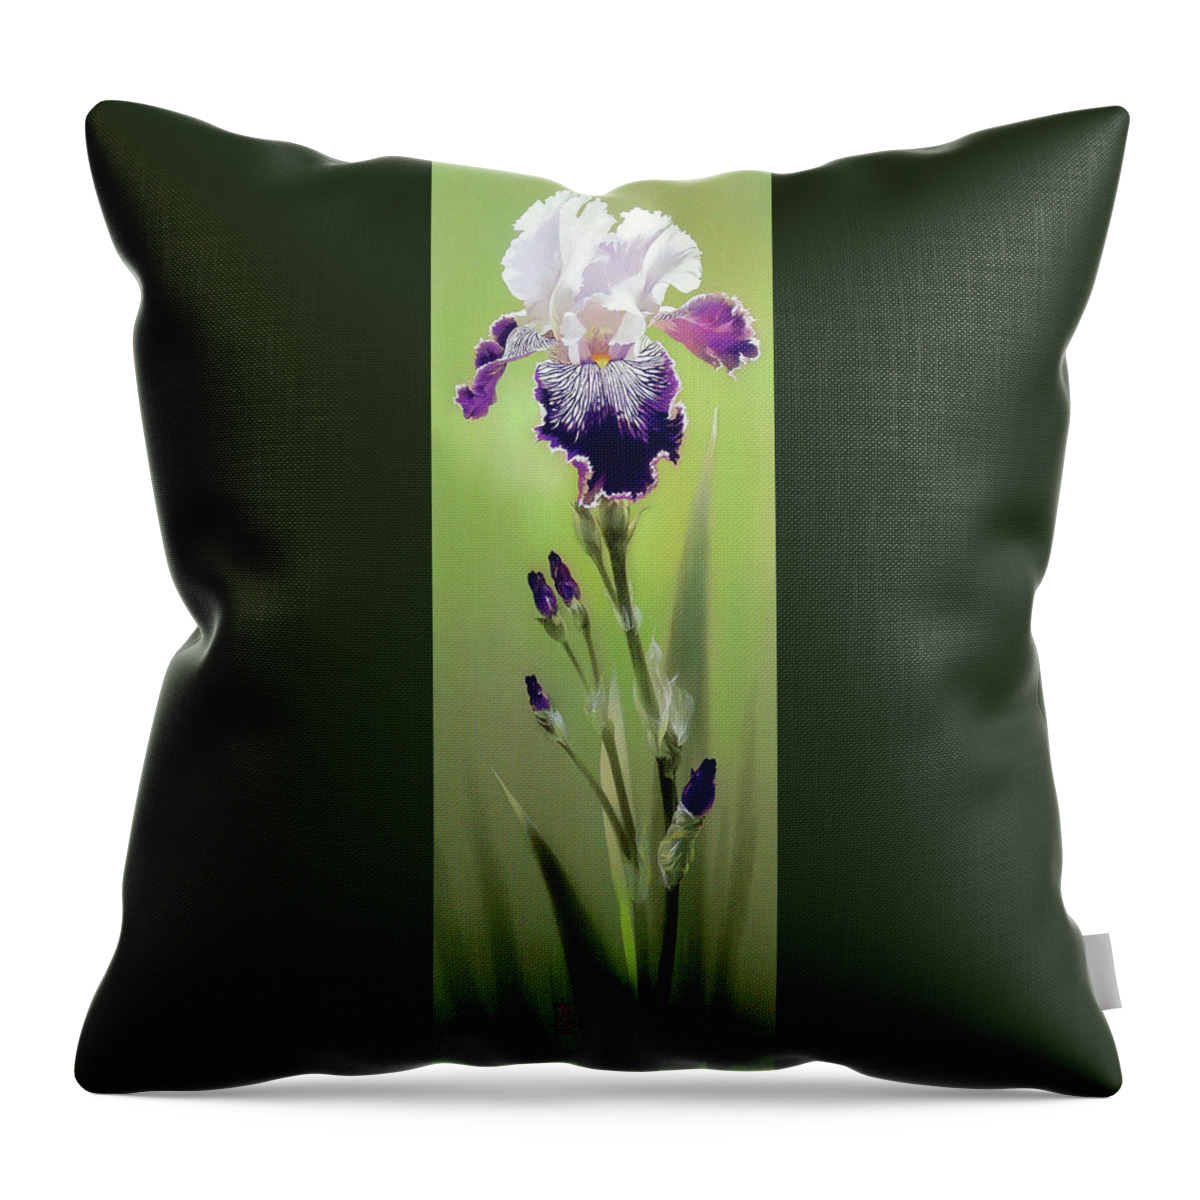 Russian Artists New Wave Throw Pillow featuring the painting Bi-colored Iris Flower by Alina Oseeva